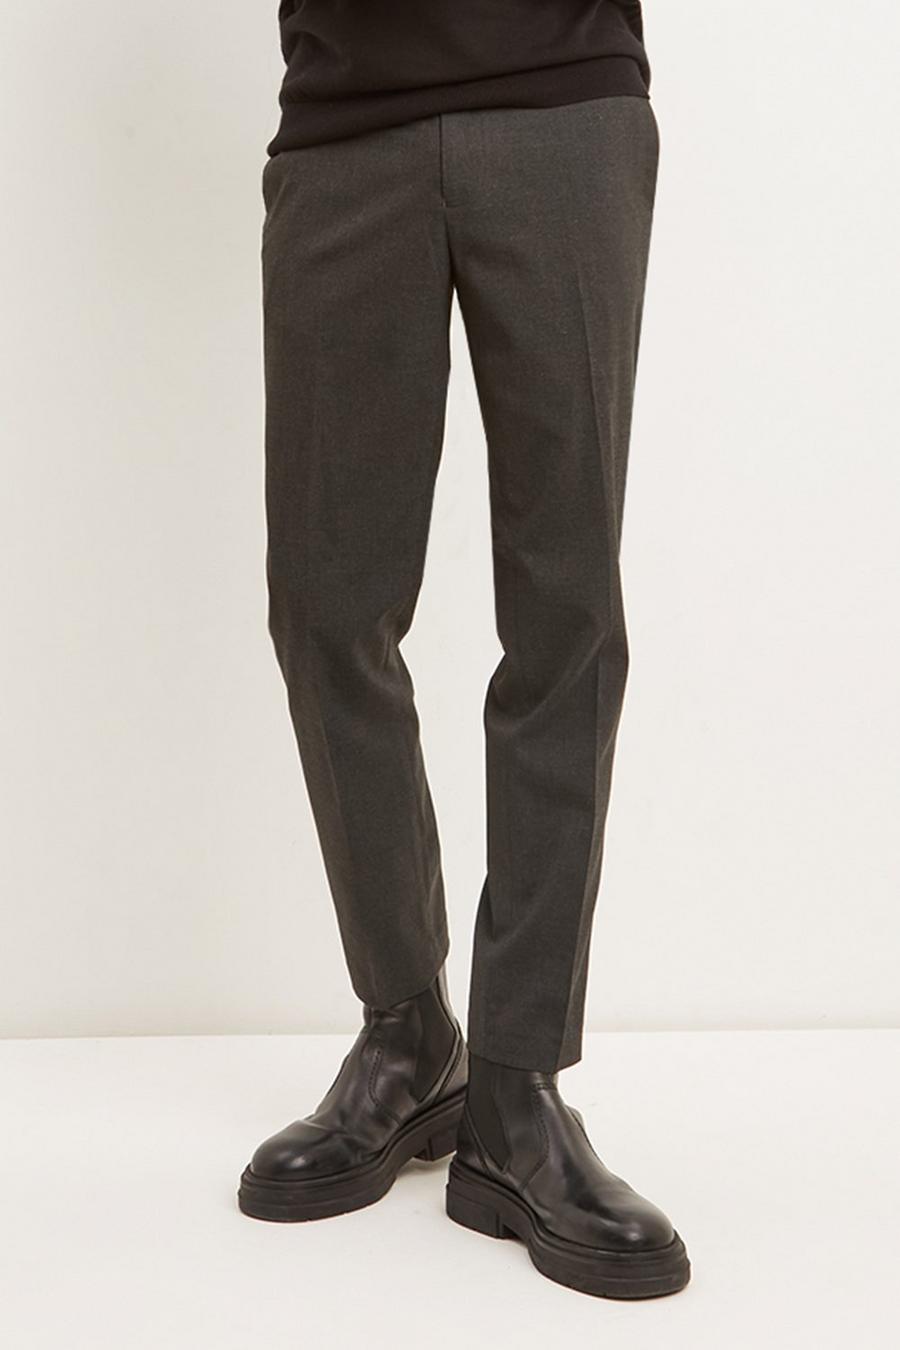 Skinny Fit Charcoal Smart Trousers